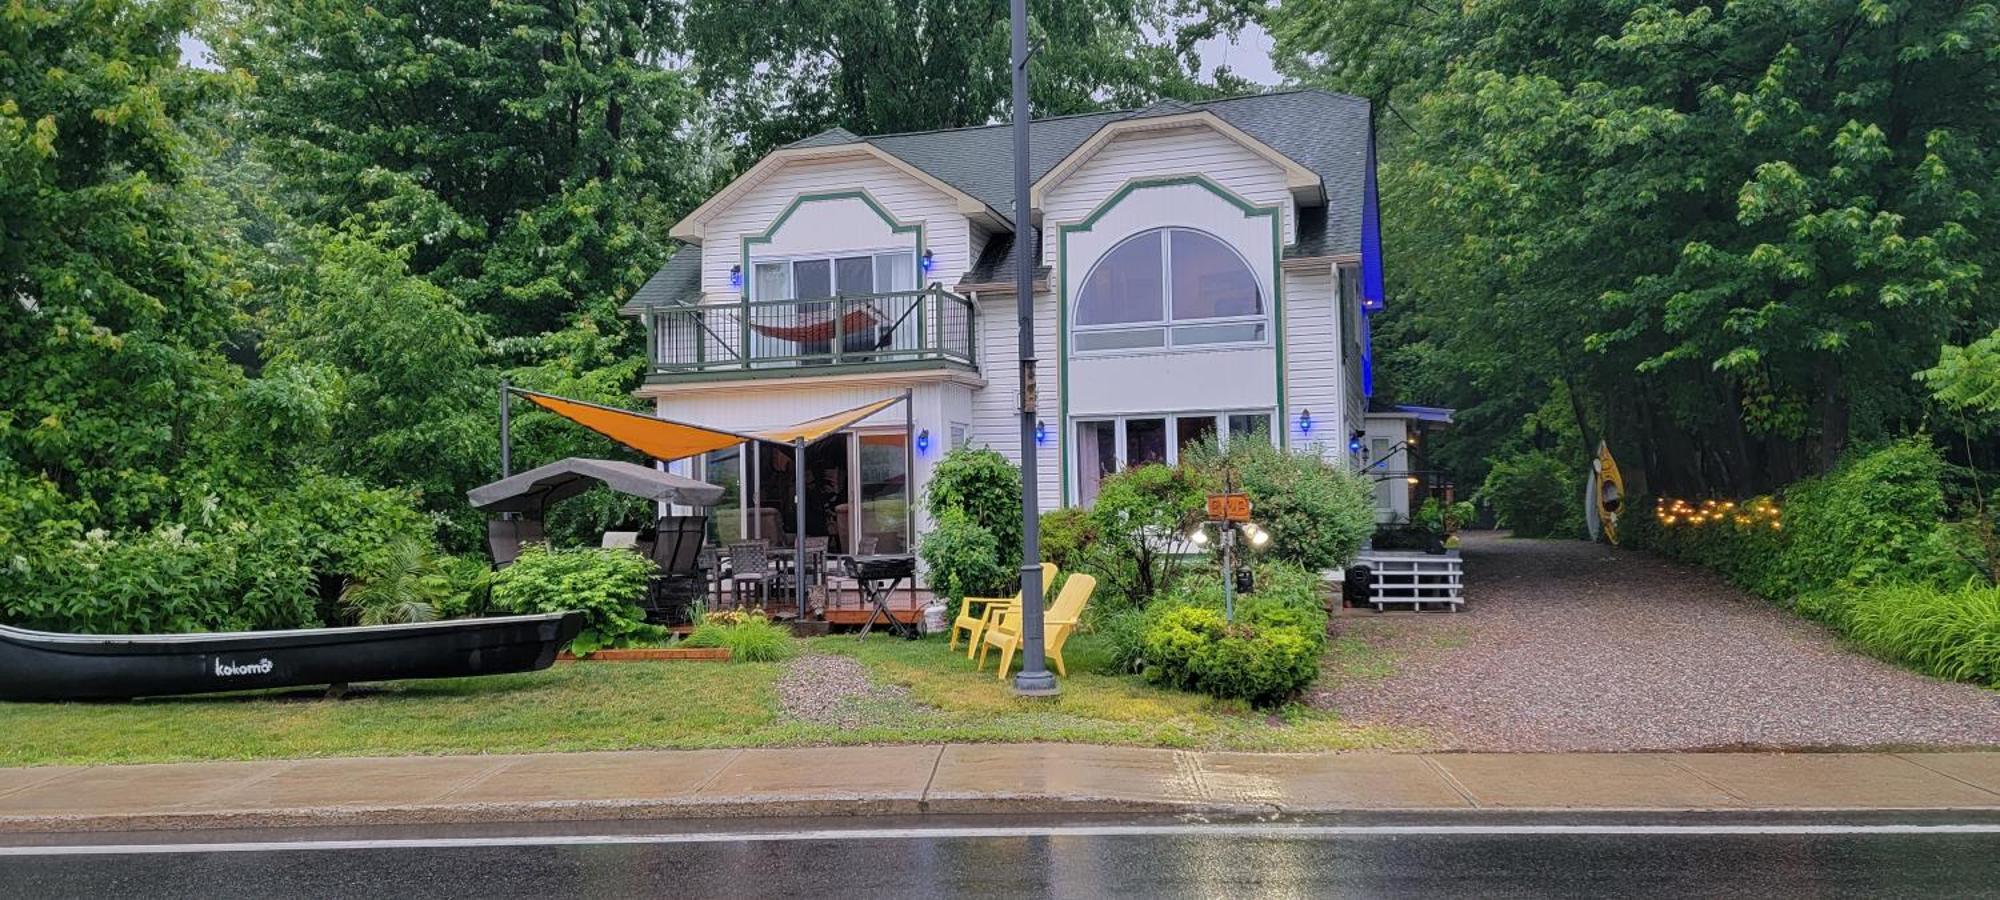 Kokomo Inn Bed And Breakfast Ottawa-Gatineau'S Only Tropical Riverfront B&B On The National Capital Cycling Pathway Route Verte #1 - For Adults Only - Chambre D'Hotes Tropical Aux Berges Des Outaouais Bnb #17542O Luaran gambar